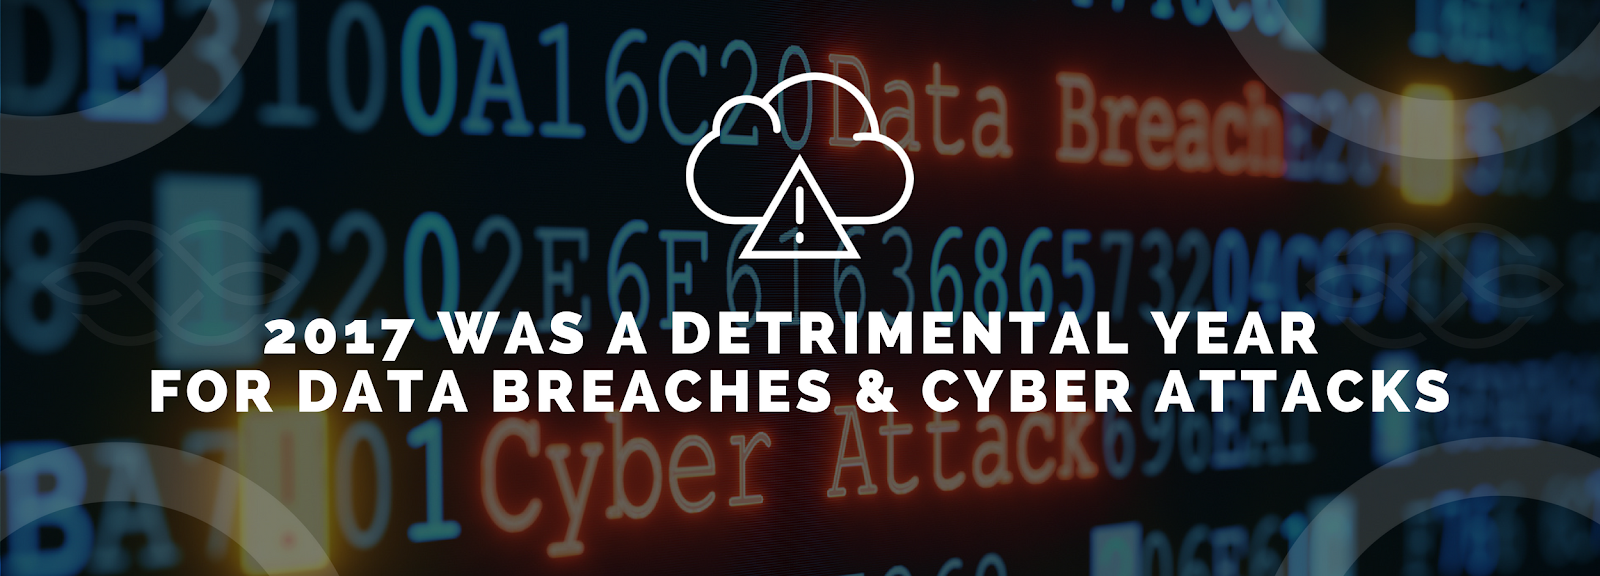 2017 Was a Detrimental Year for Data Breaches & Cyber Attacks